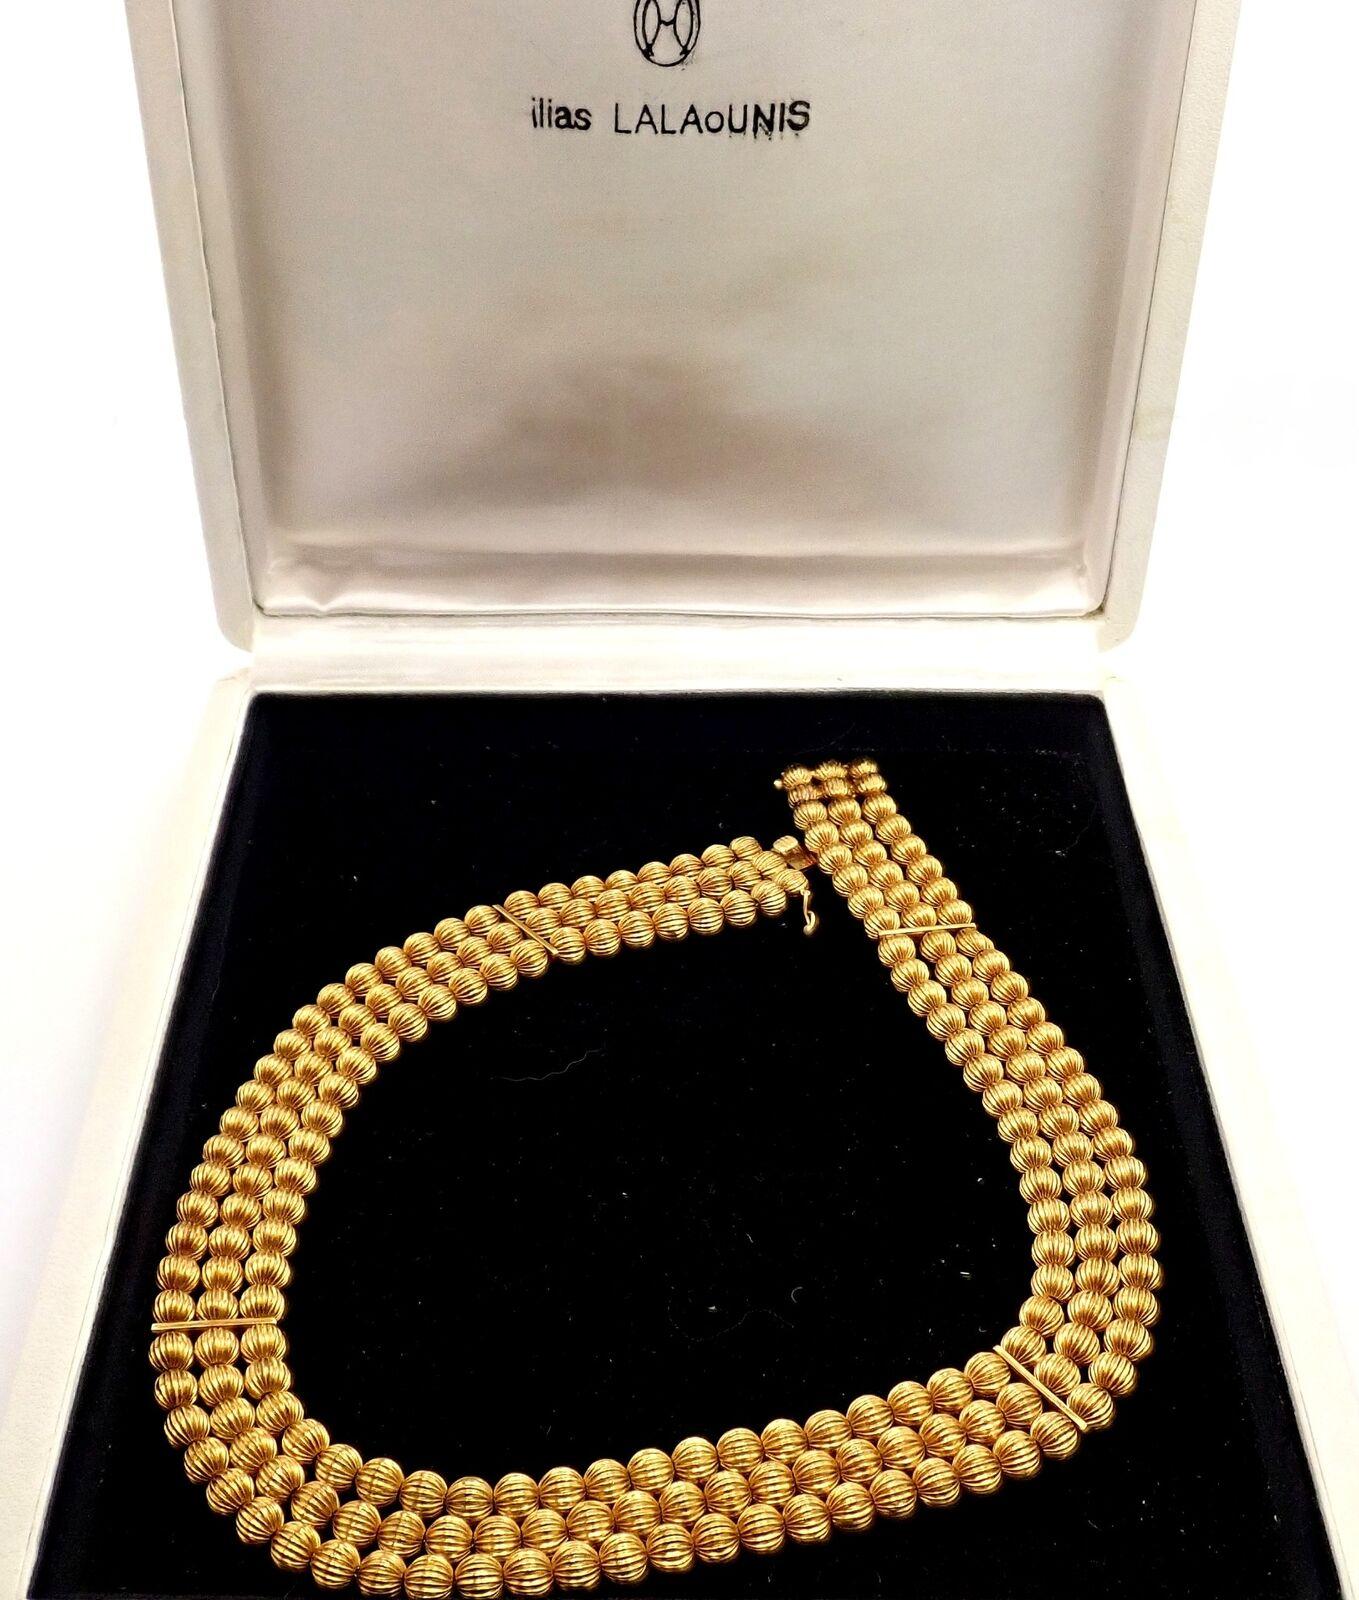 18k Yellow Gold Carved Bead Ball Necklace by Ilias Lalaounis Greece.
Details: 
Length 16